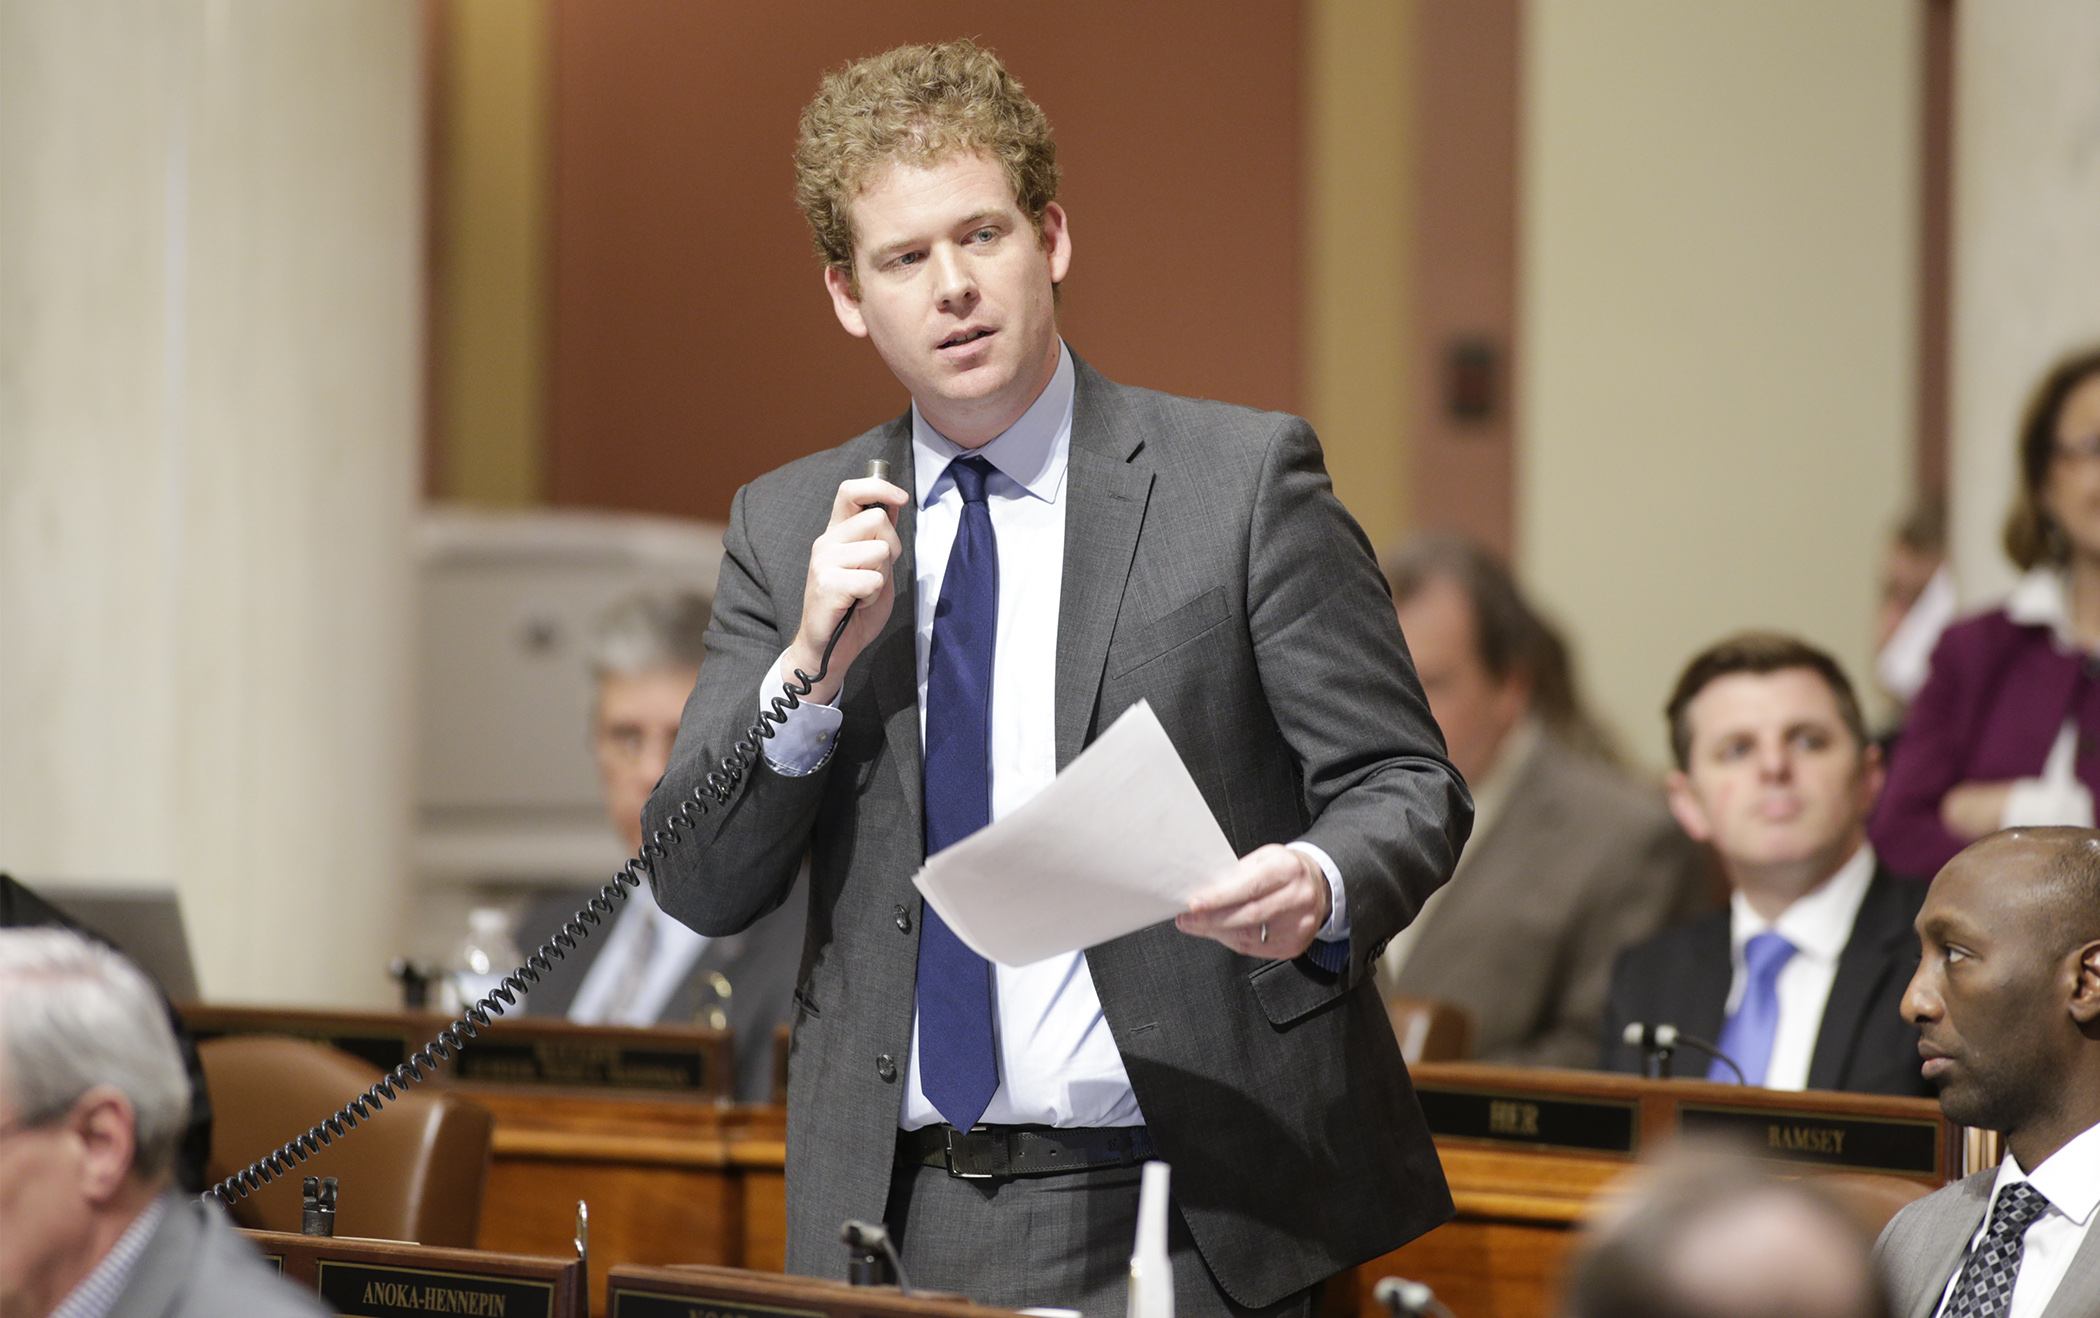 Rep. Zack Stephenson describes provisions of HF15 which would, in part, repeal the “marital exception” for certain criminal sexual conduct offenses. Photo by Paul Battaglia